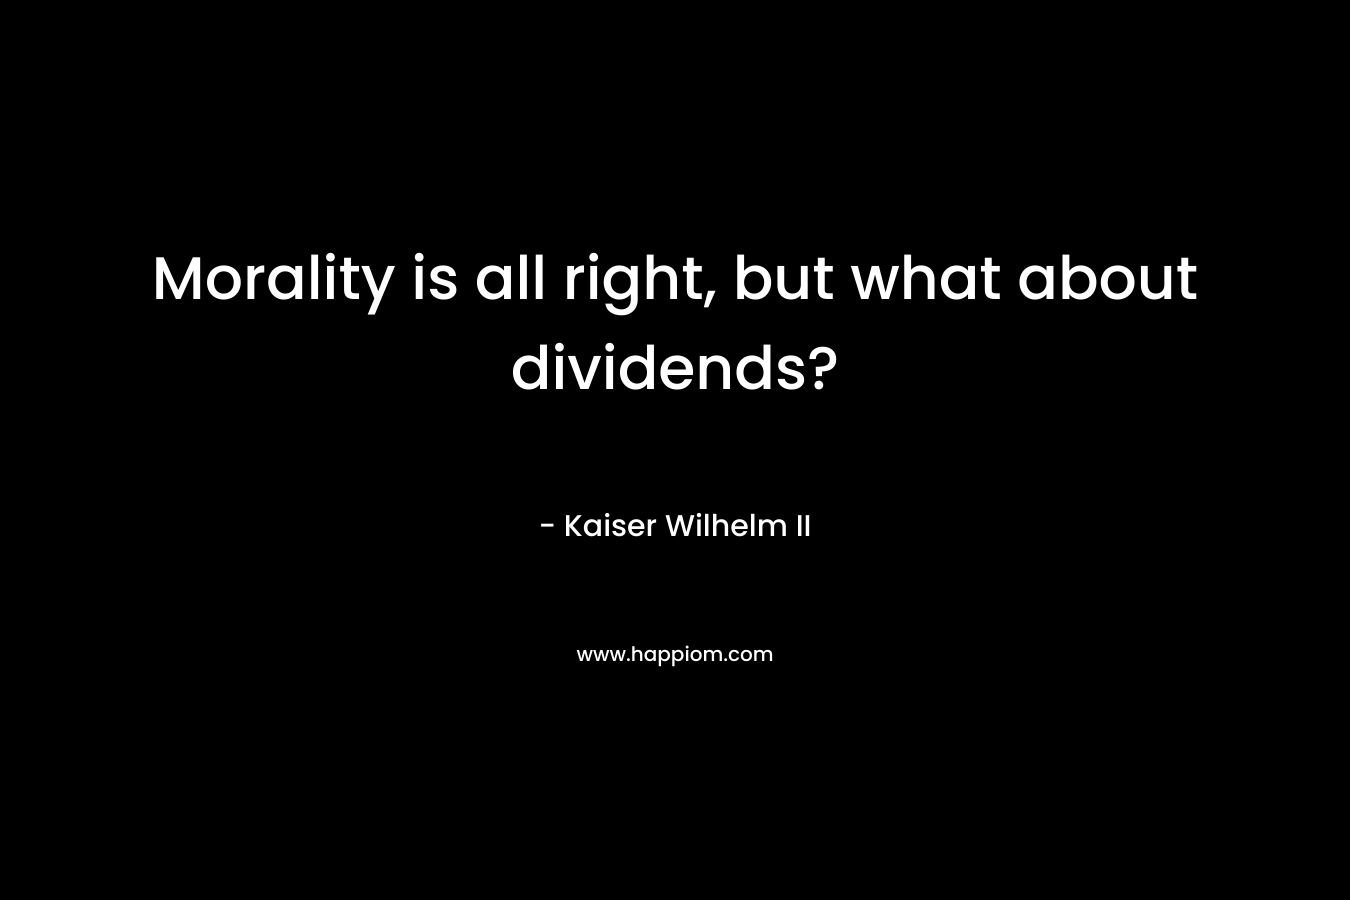 Morality is all right, but what about dividends? – Kaiser Wilhelm II